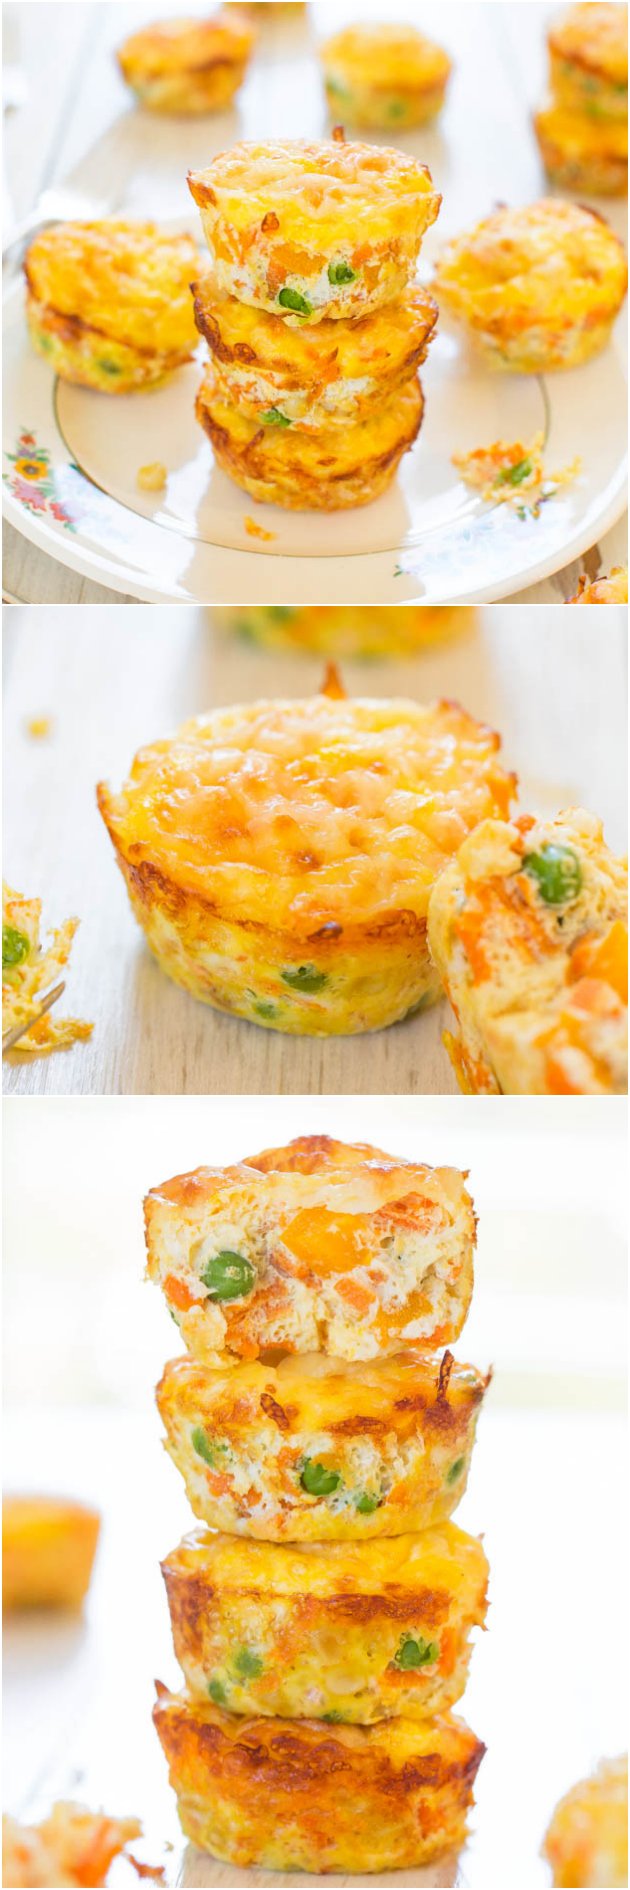 100-Calorie Cheese, Vegetable and Egg Muffins (GF) - Healthy, easy & only 100 calories! You'll want to keep a stash on hand!